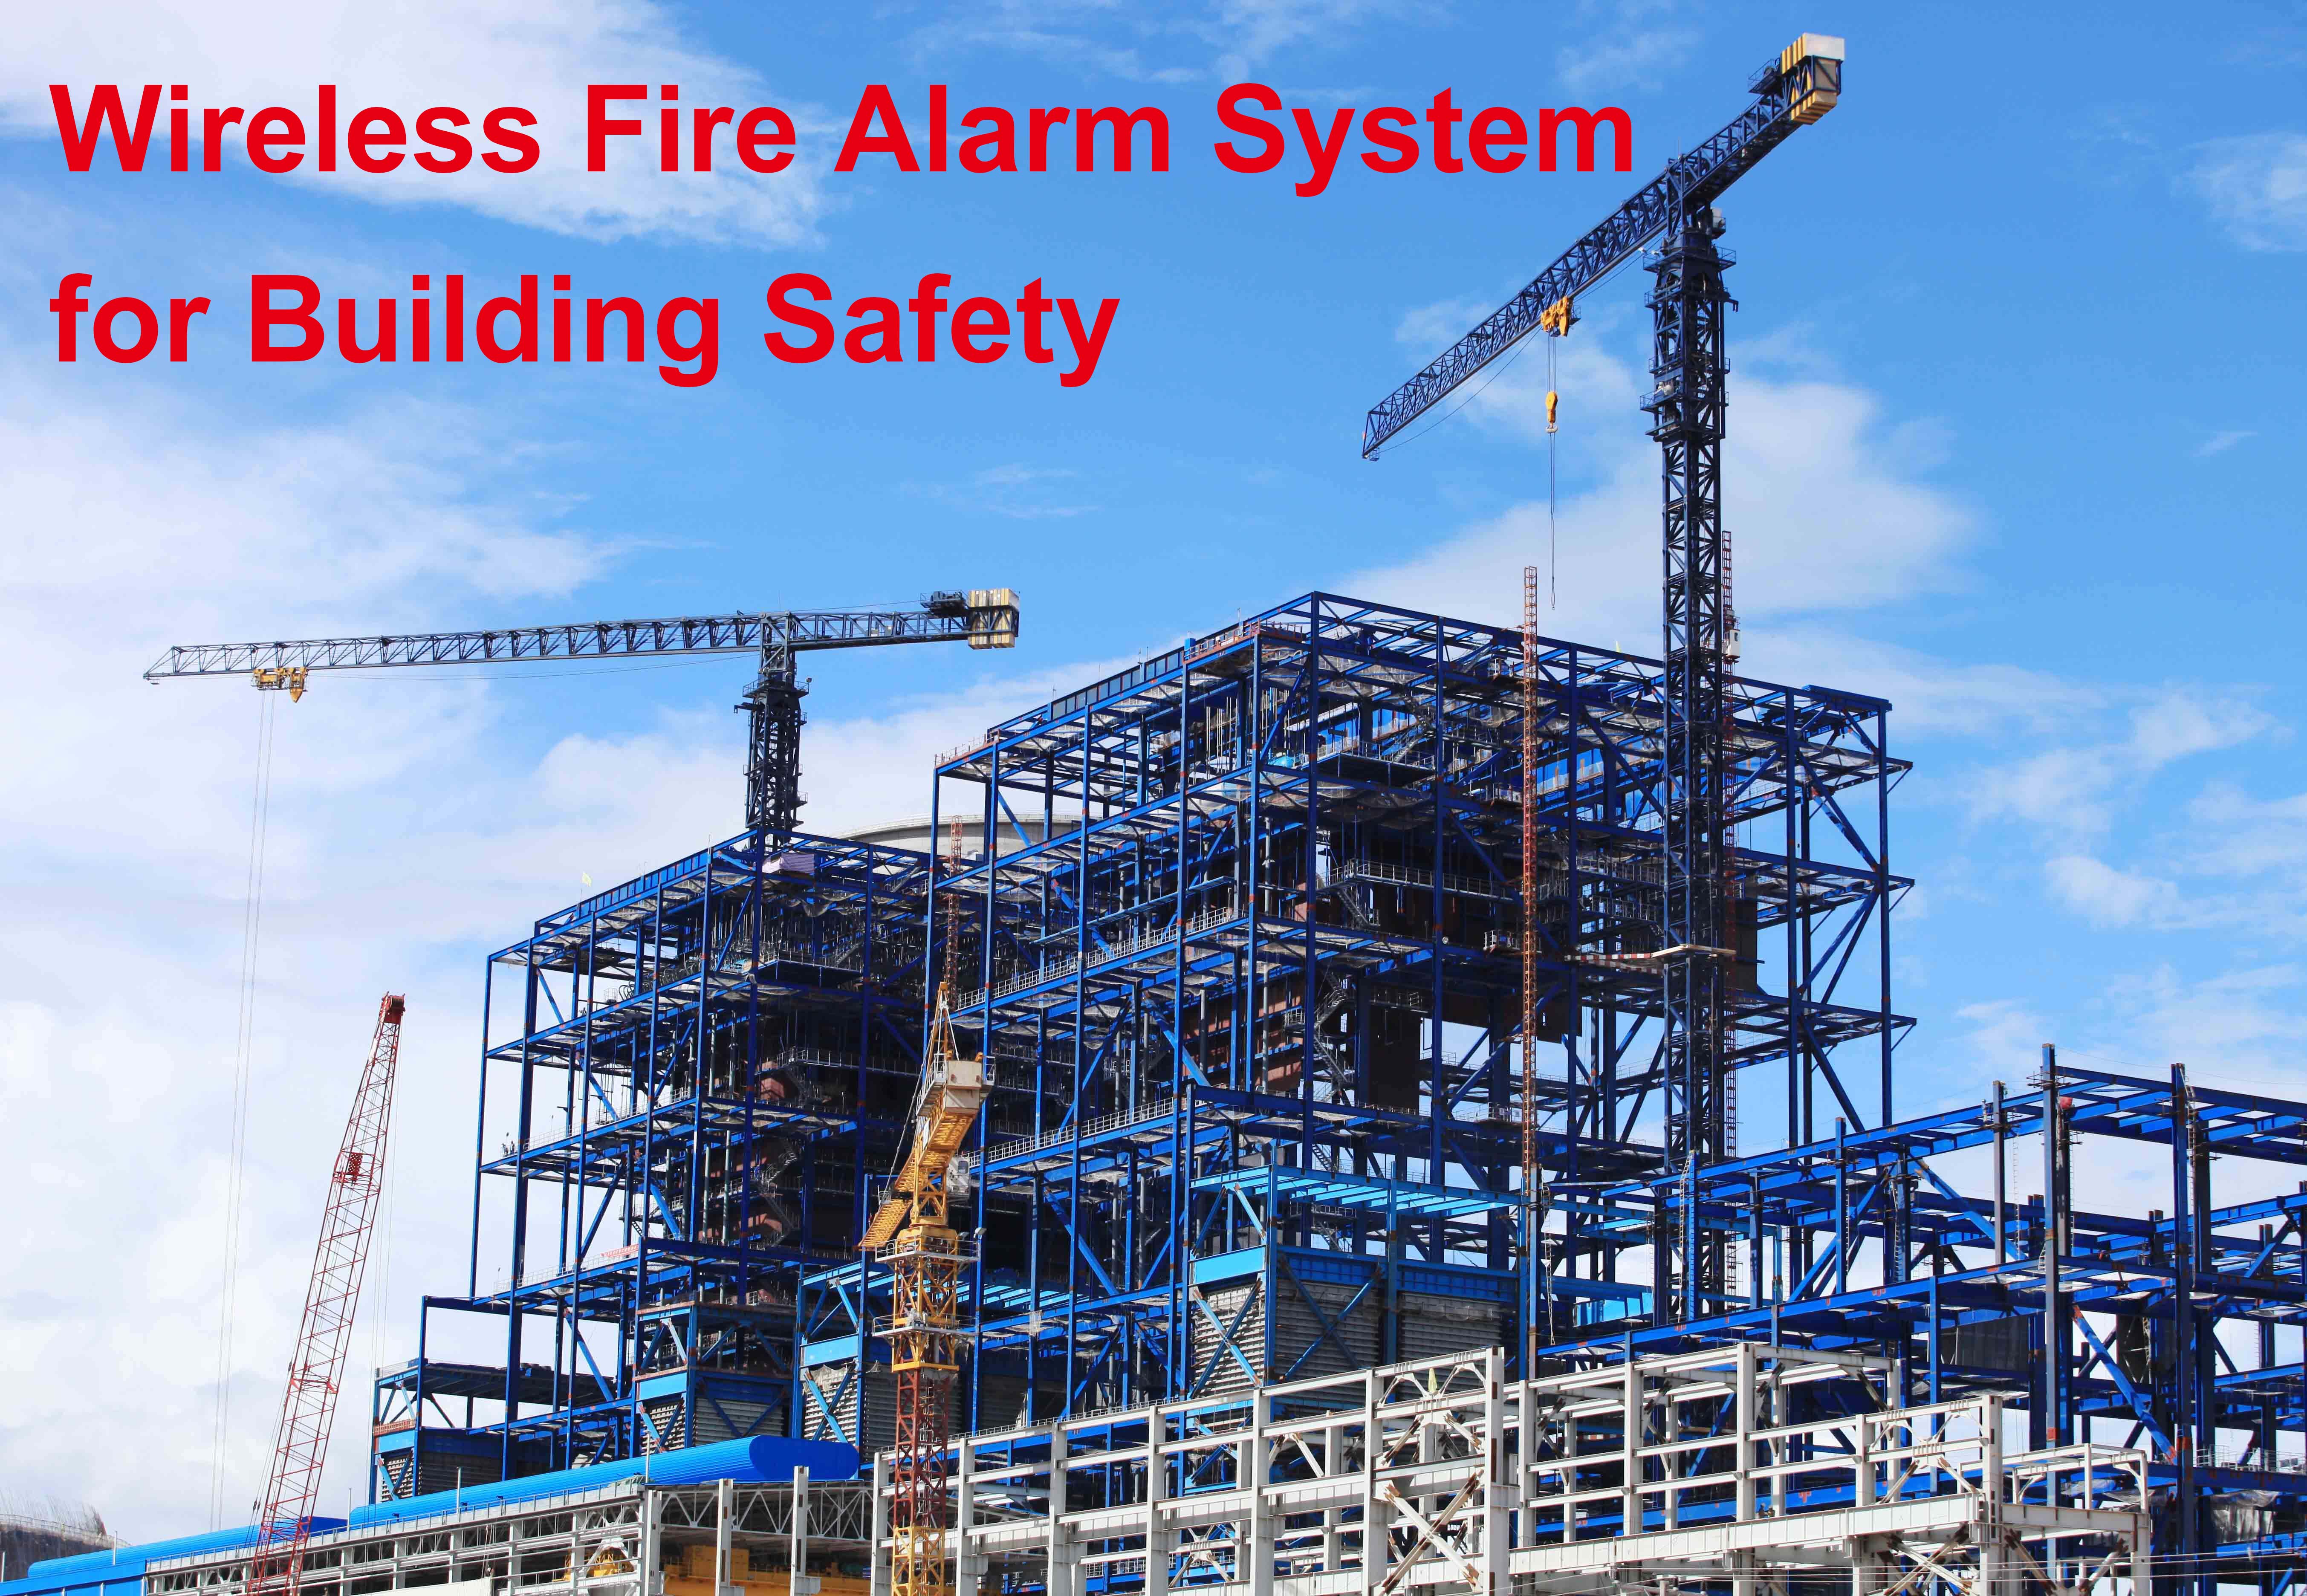 Advantages of Wireless Fire Alarm System for Building Safety